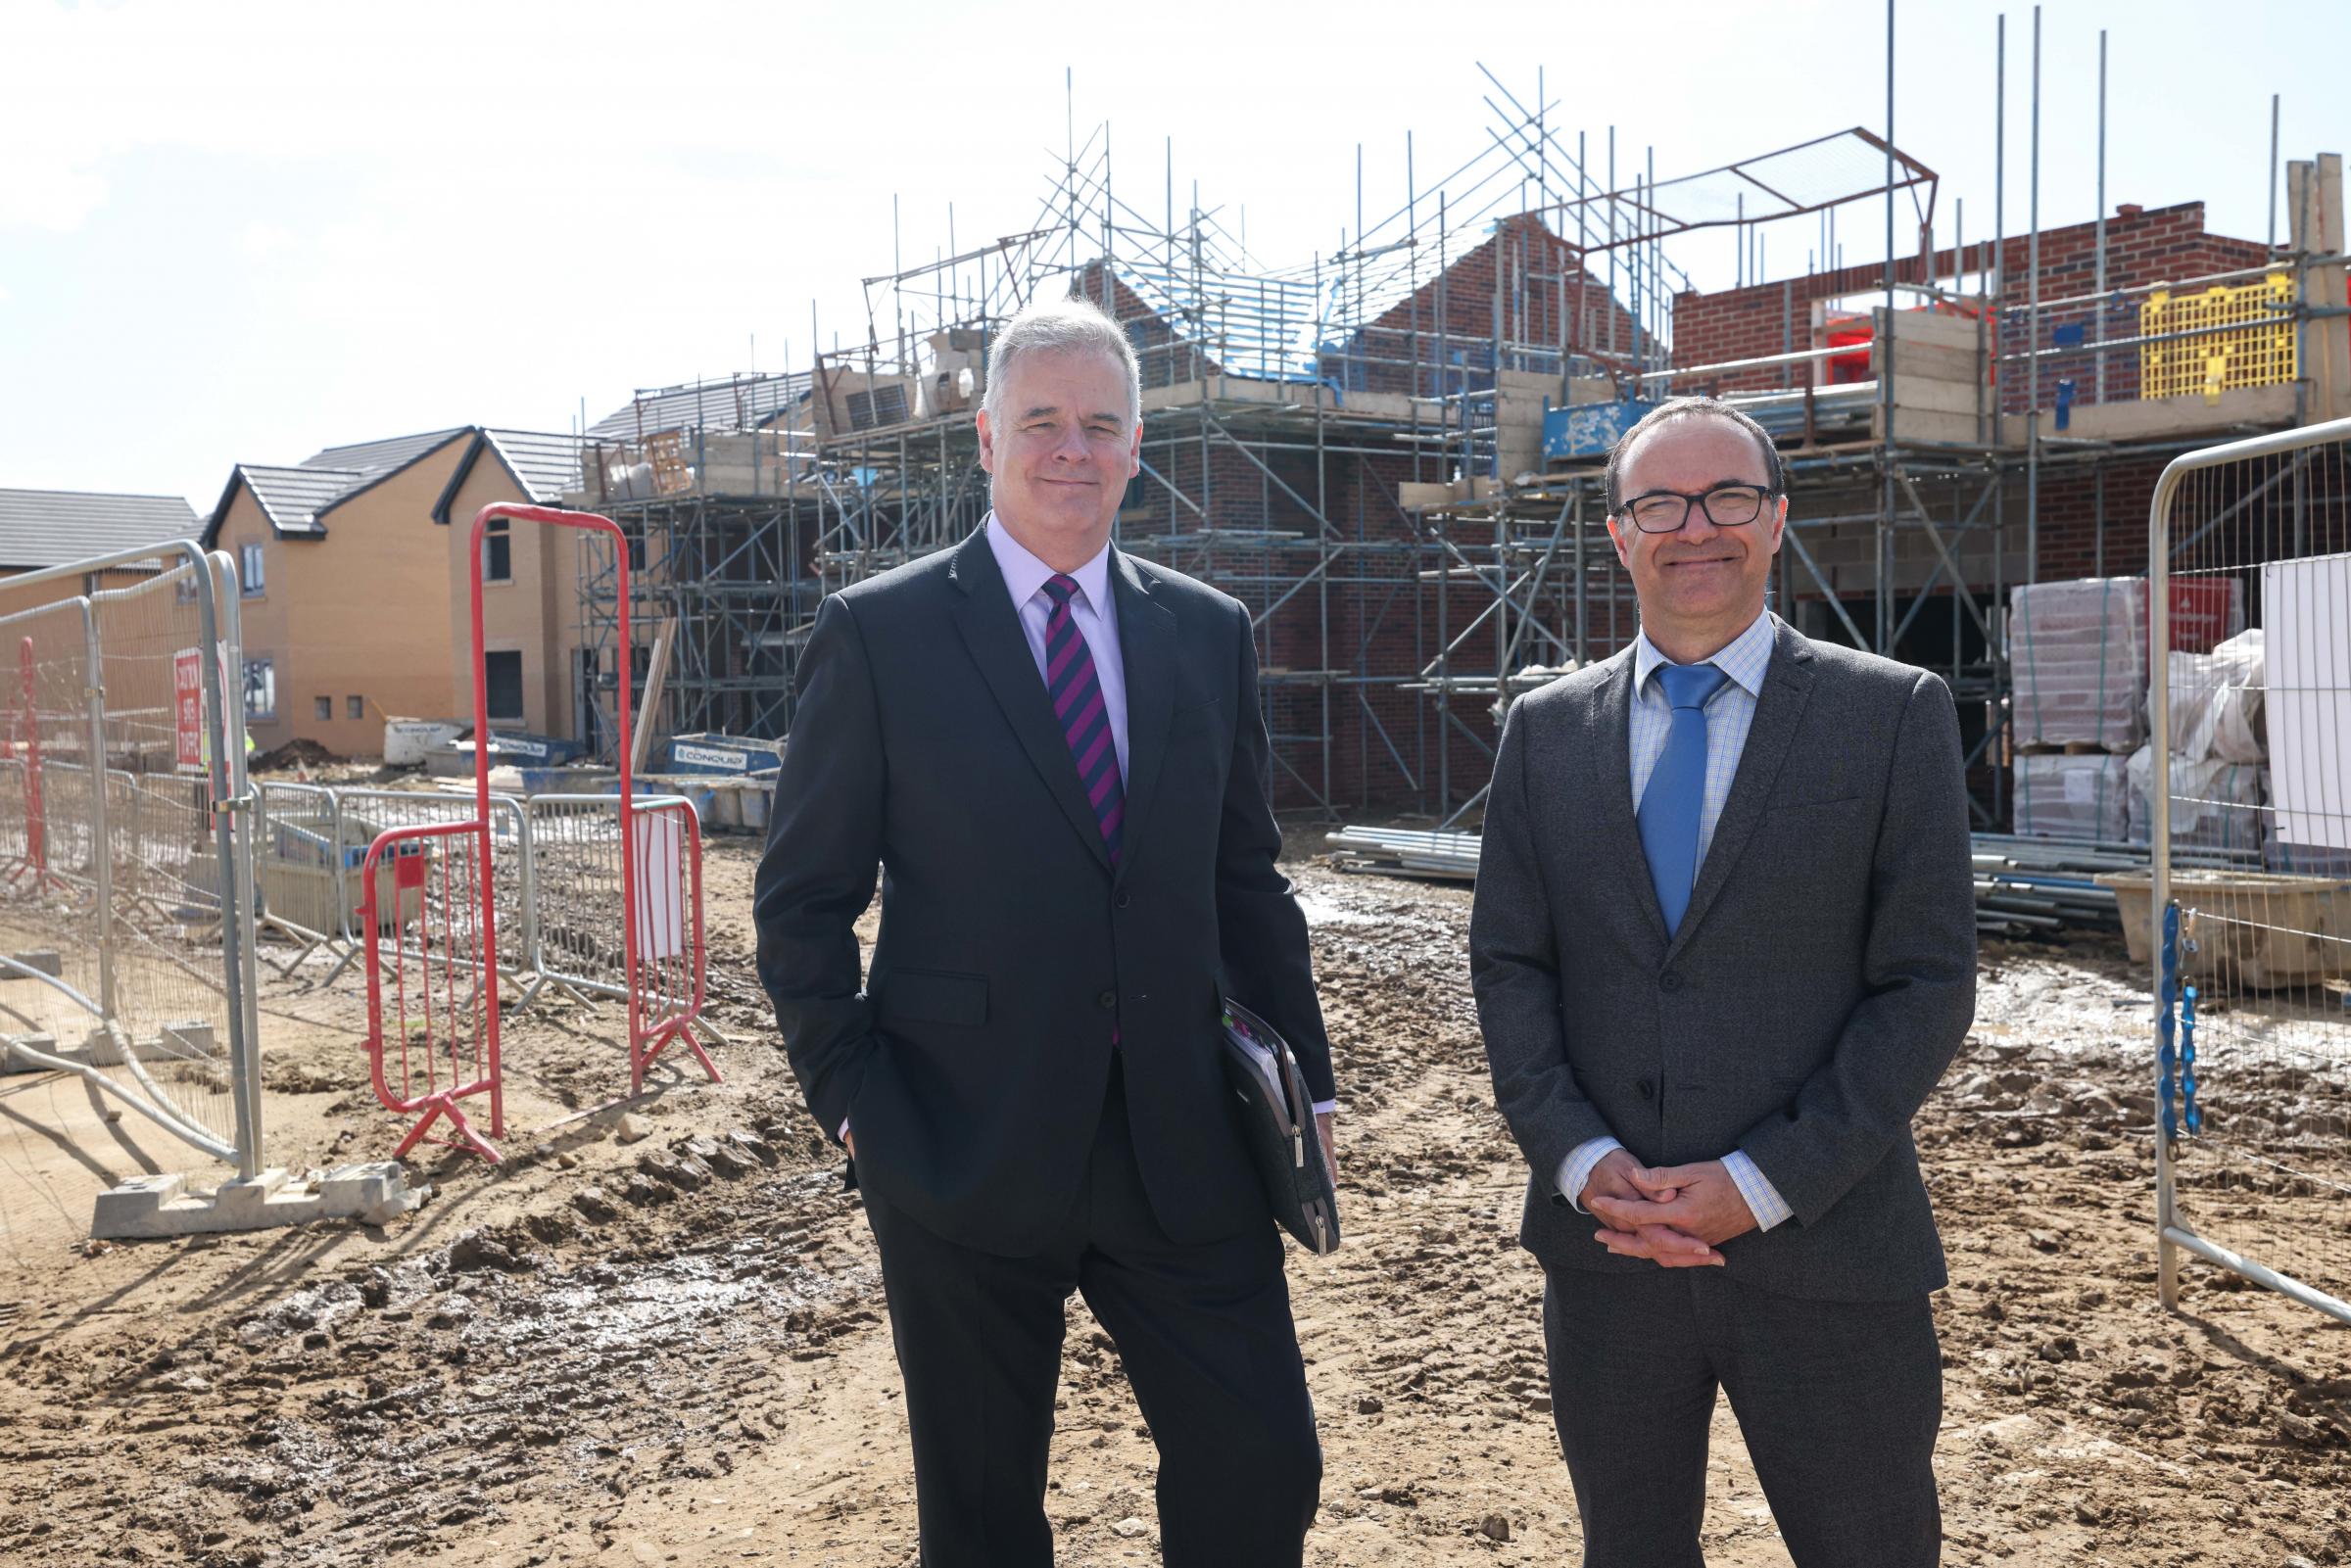 Building society is the first to help people build own homes